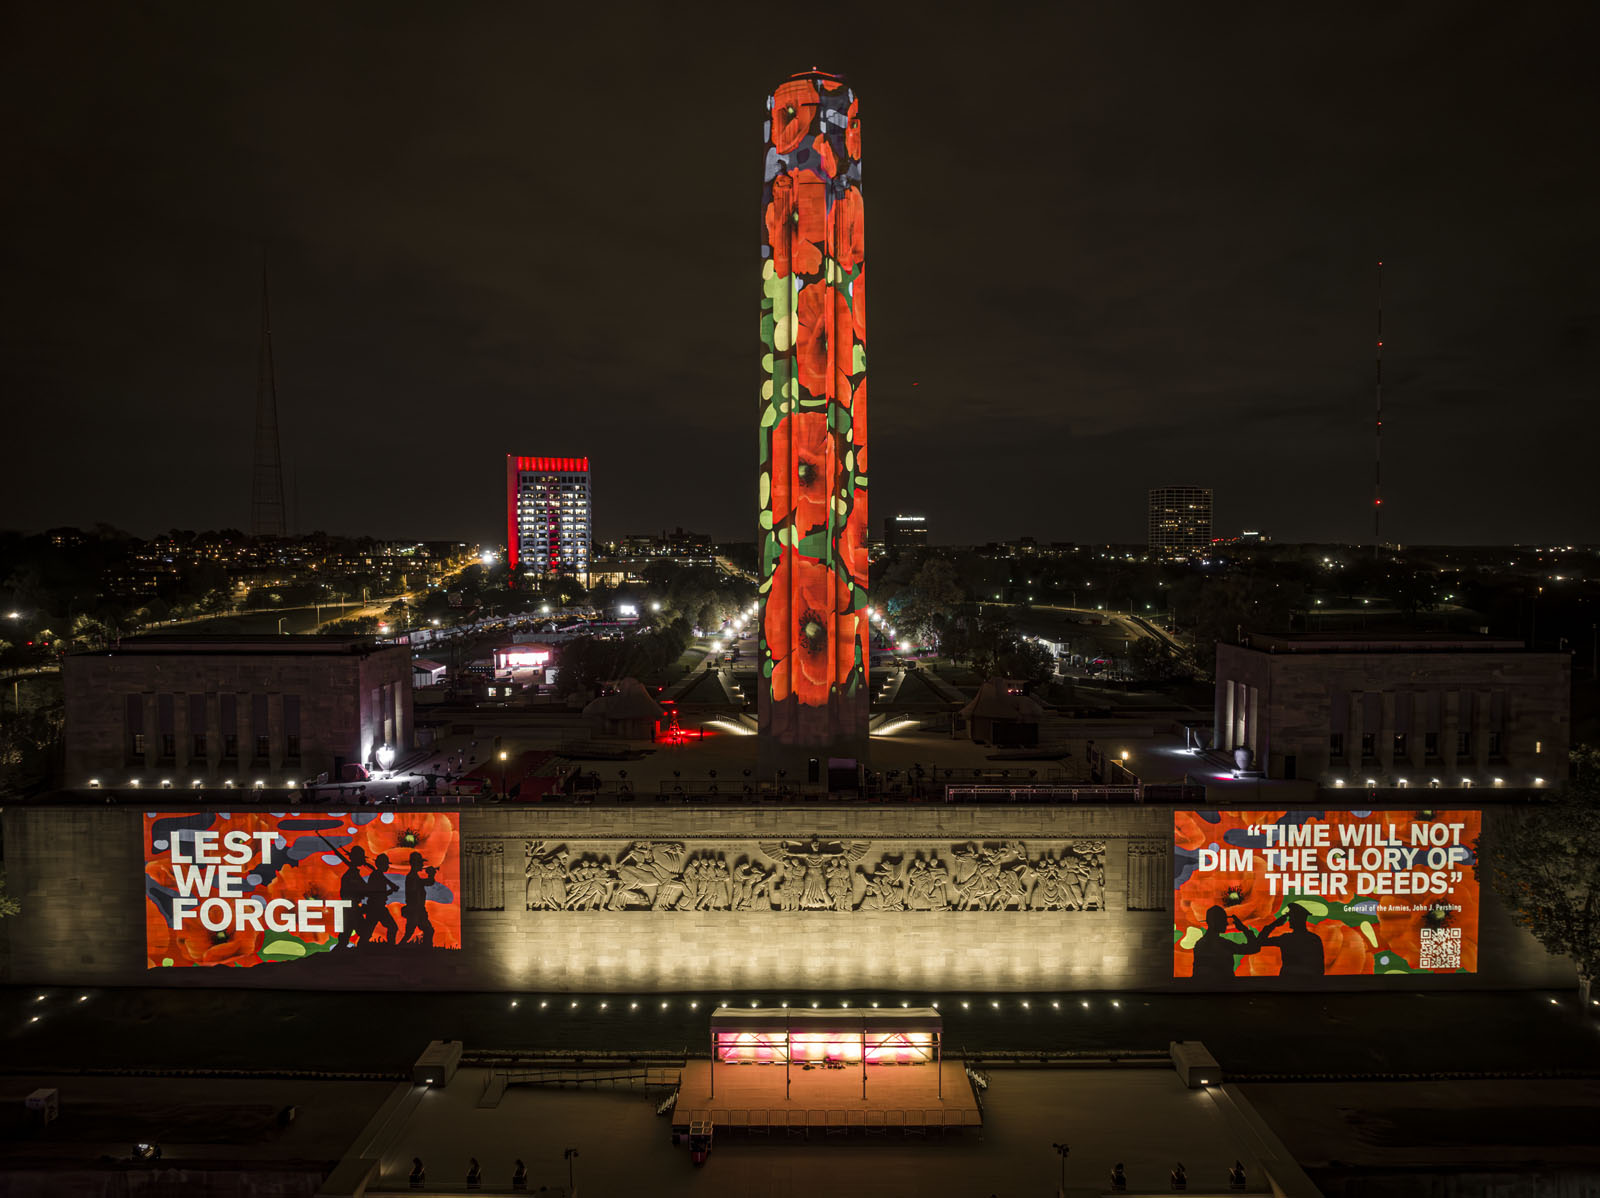 Modern photograph of the Liberty Memorial Tower, Great Frieze and North Terrace Wall taken from high above the North Lawn. The Tower is covered in projections of poppies. More poppies plus text and pictures are projected onto the North Terrace Wall on either side of the Great Frieze.